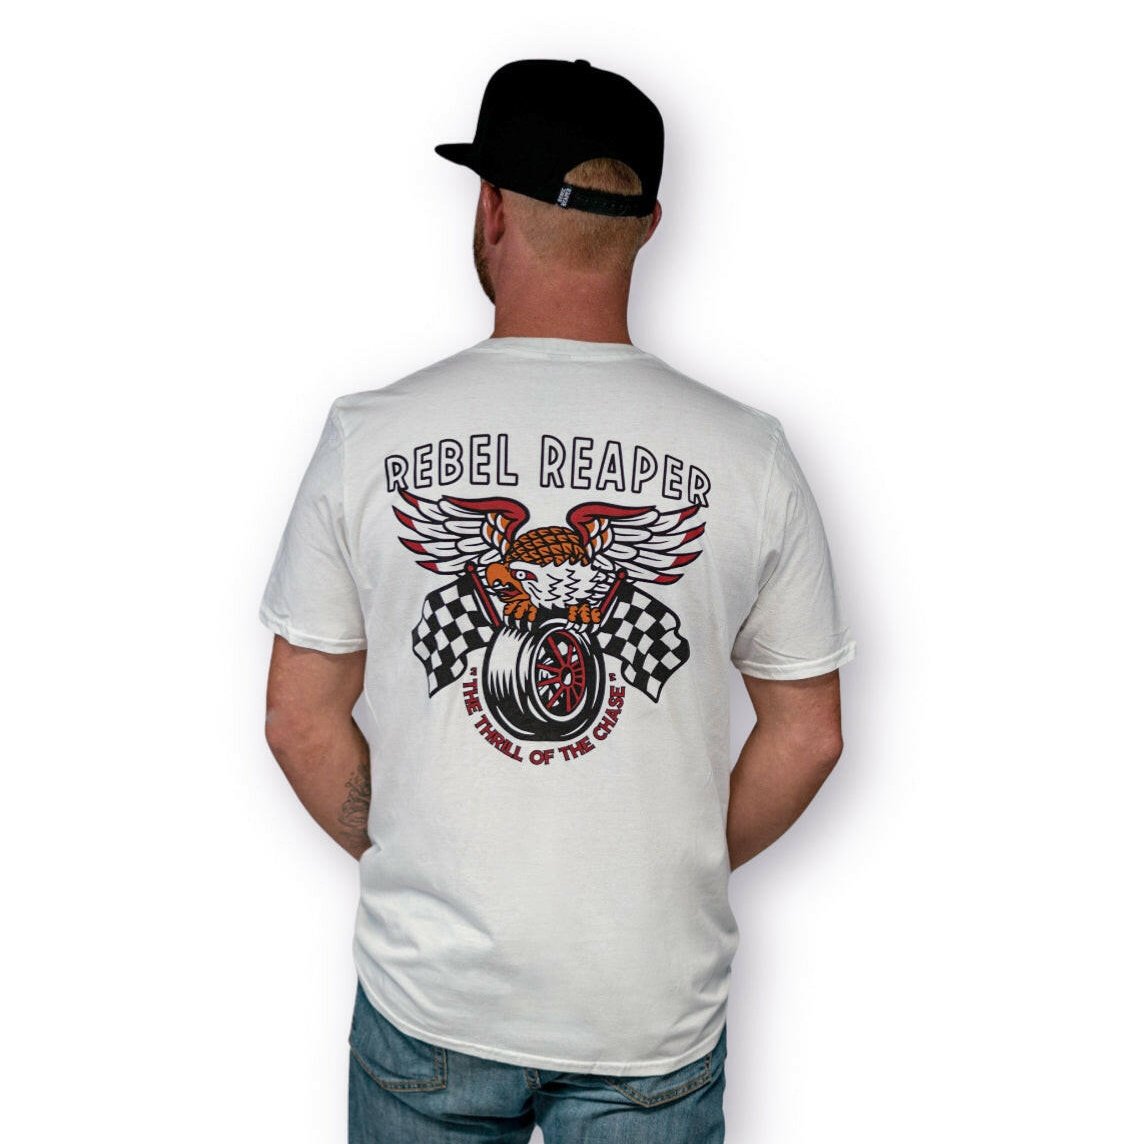 Thrill of the Chase White T-Shirt - Rebel Reaper Clothing Company T-Shirt